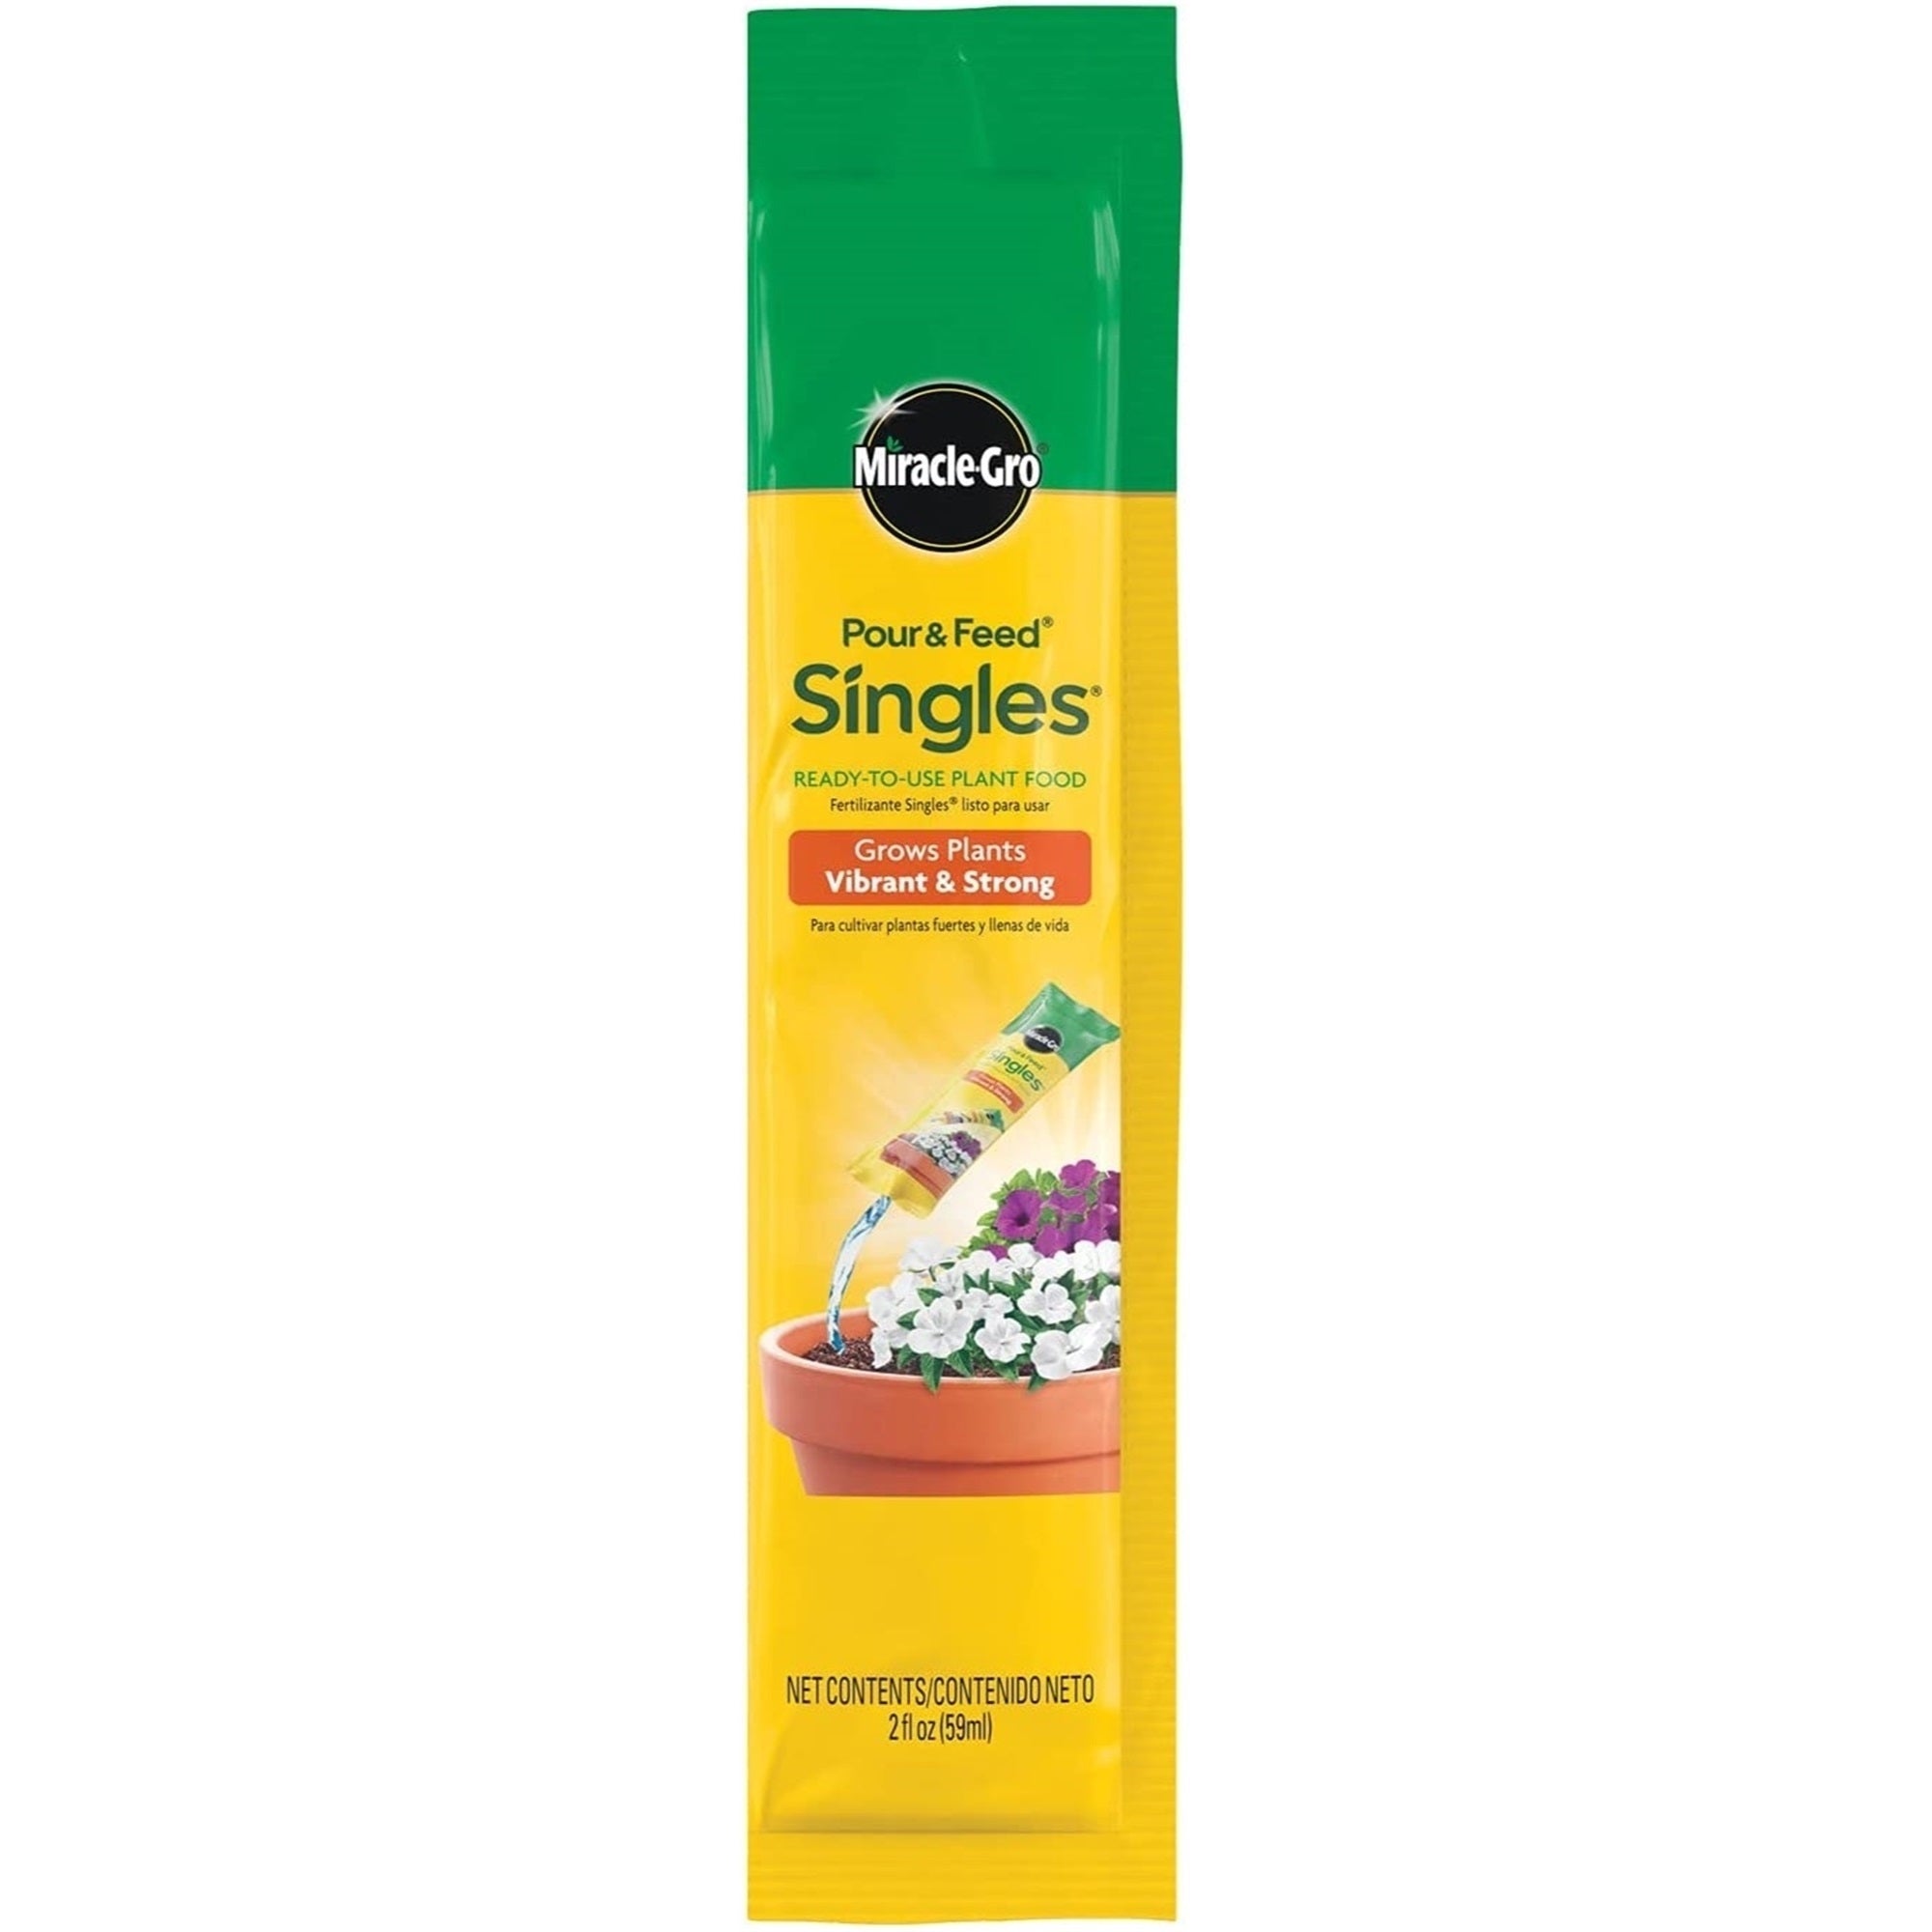 Scotts Miracle-Gro Pour and Feed Singles, RTU Plant Food, 1 Packet, 2 oz